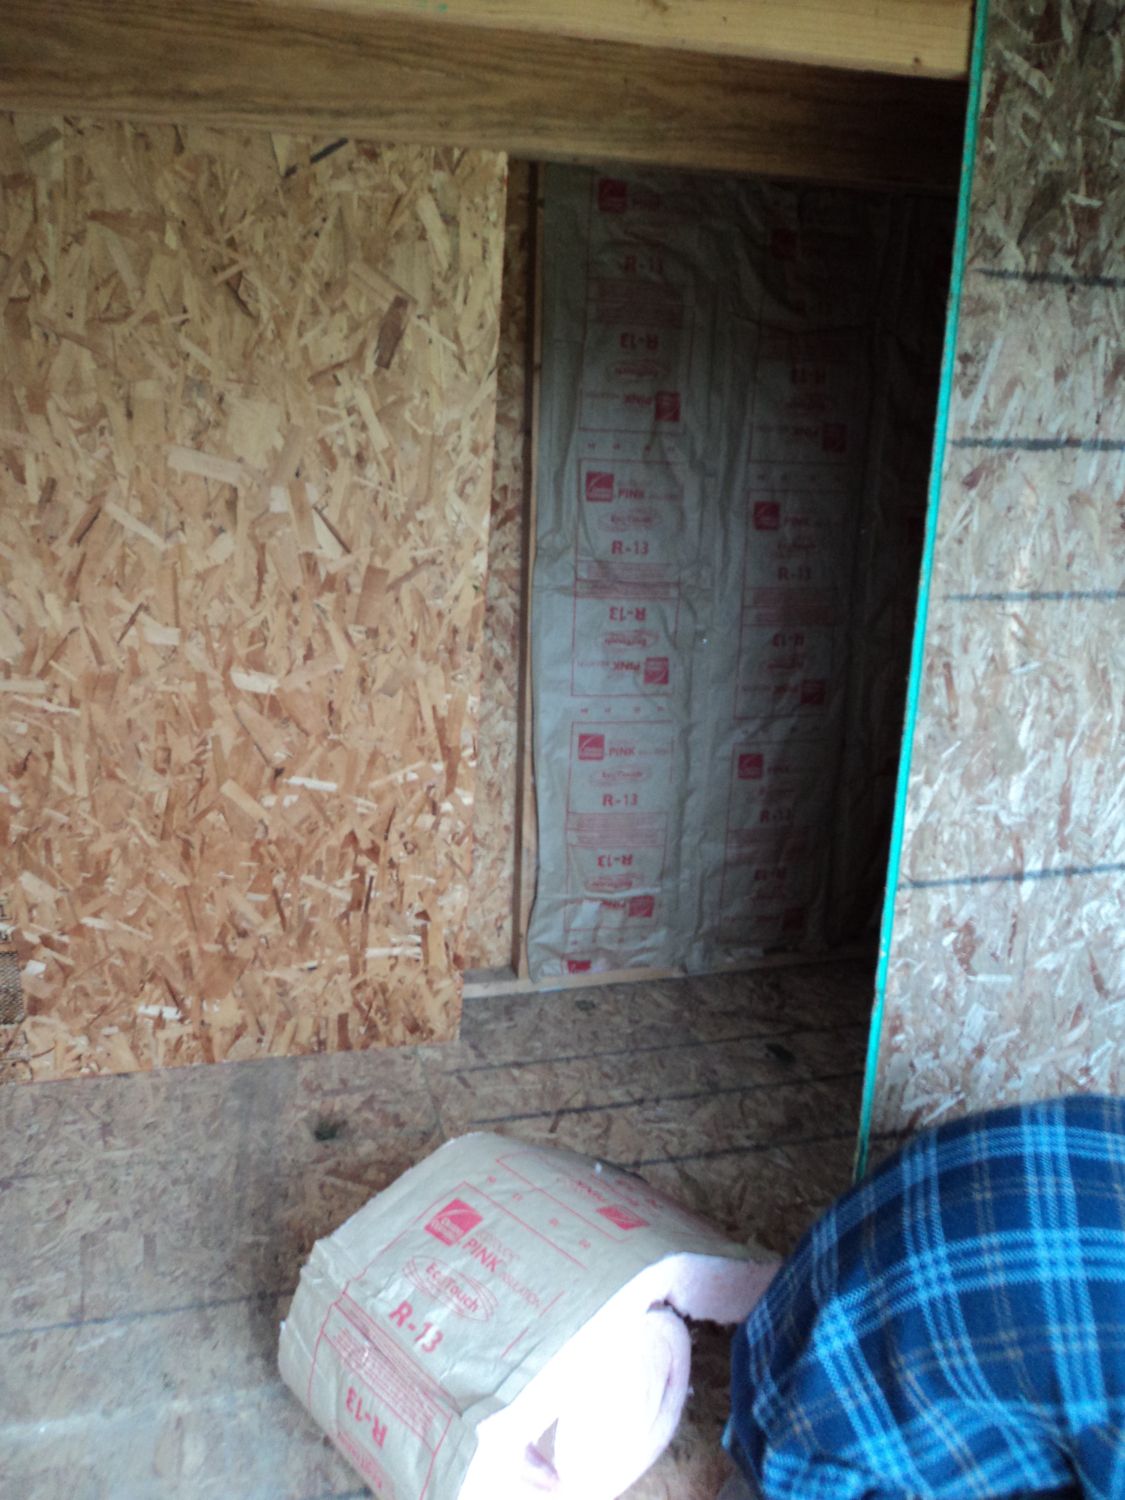 Insulation was really important to us, since in Oregon our winters can 